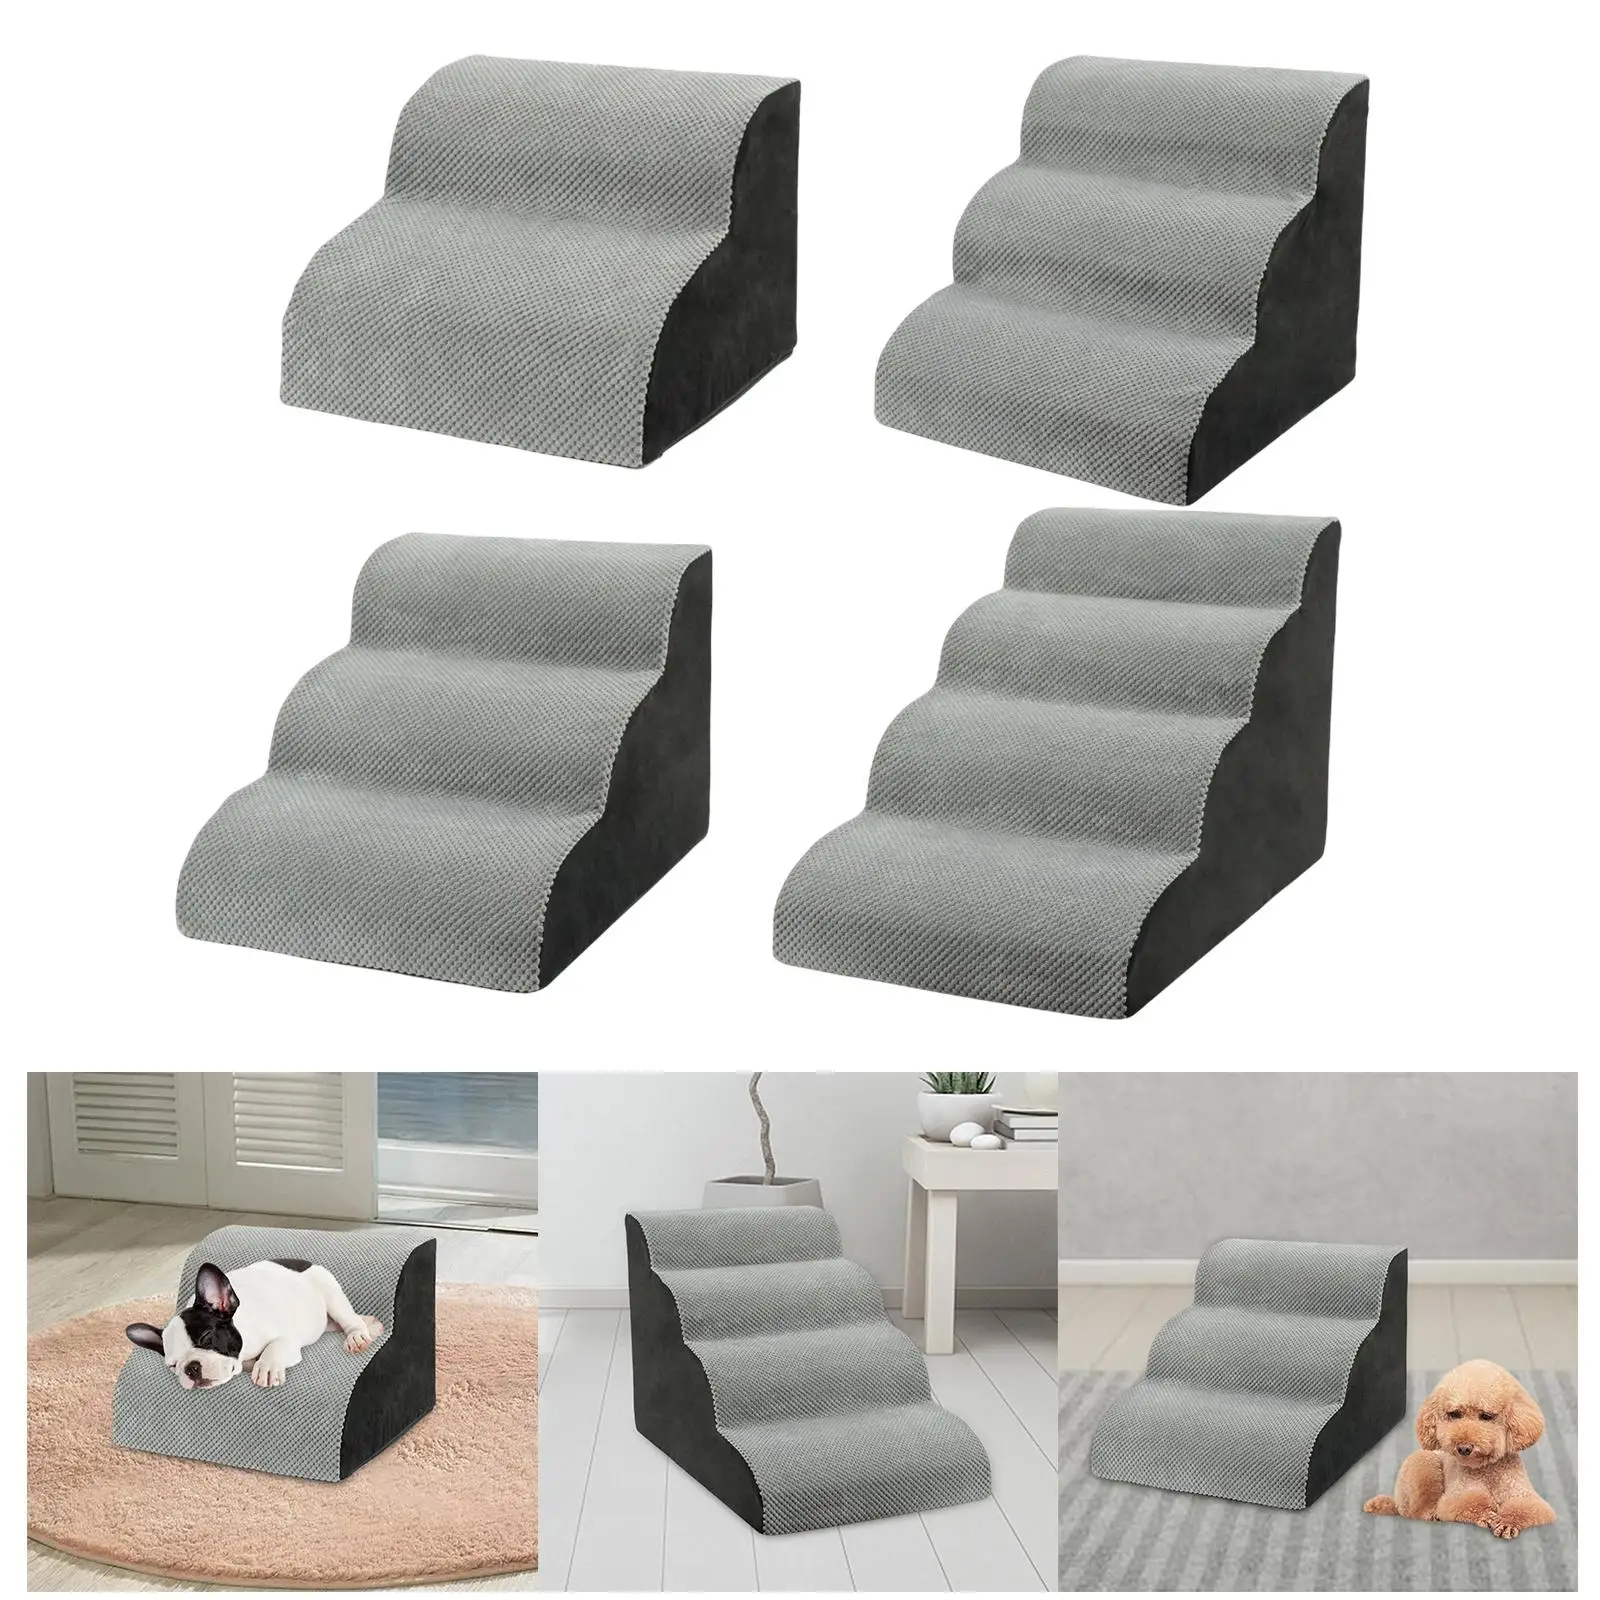 Comfortable Dog Stairs Dog Ramp Ladder Climbing Washable Cover Portable Slope Dog Bed Stairs Pet Stairs Older Dogs Couch Bed